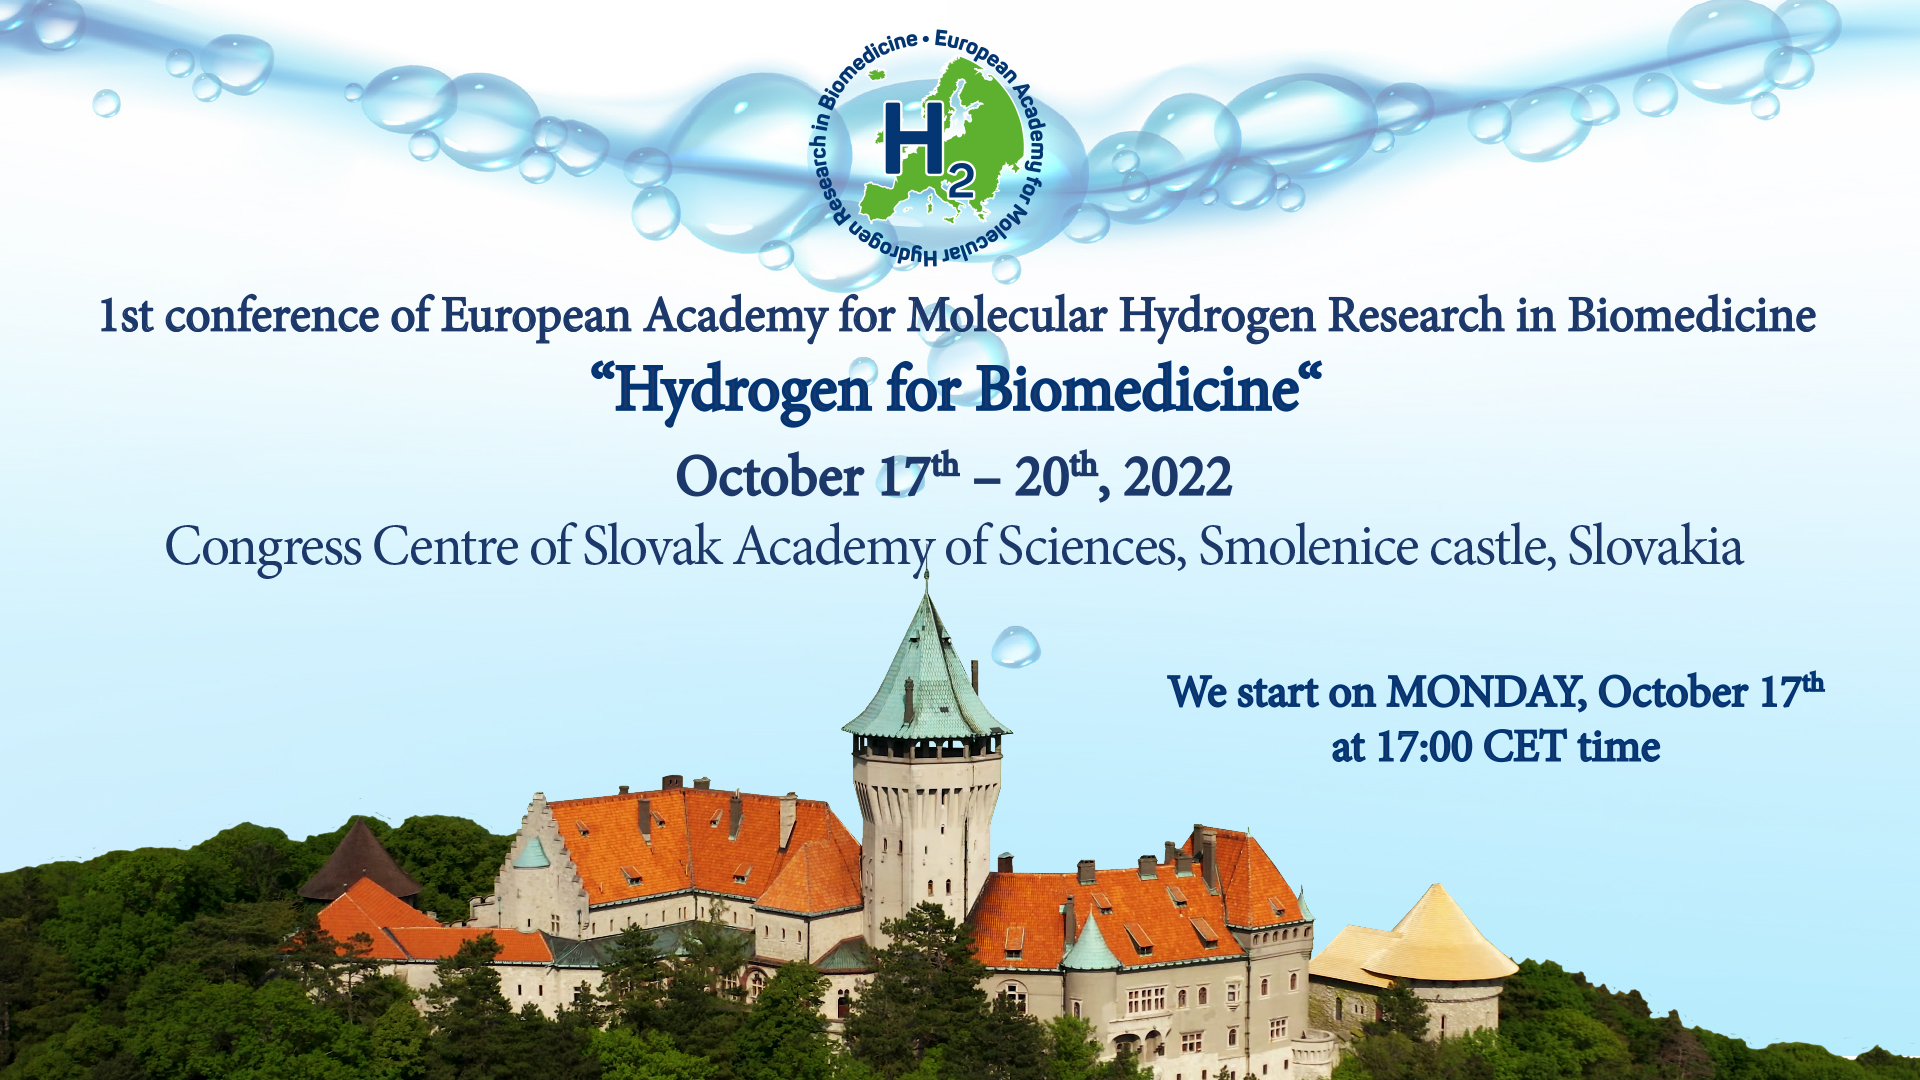 1st conference of European Academy for Molecular Hydrogen Research in Biomedicine “Hydrogen for Biomedicine“